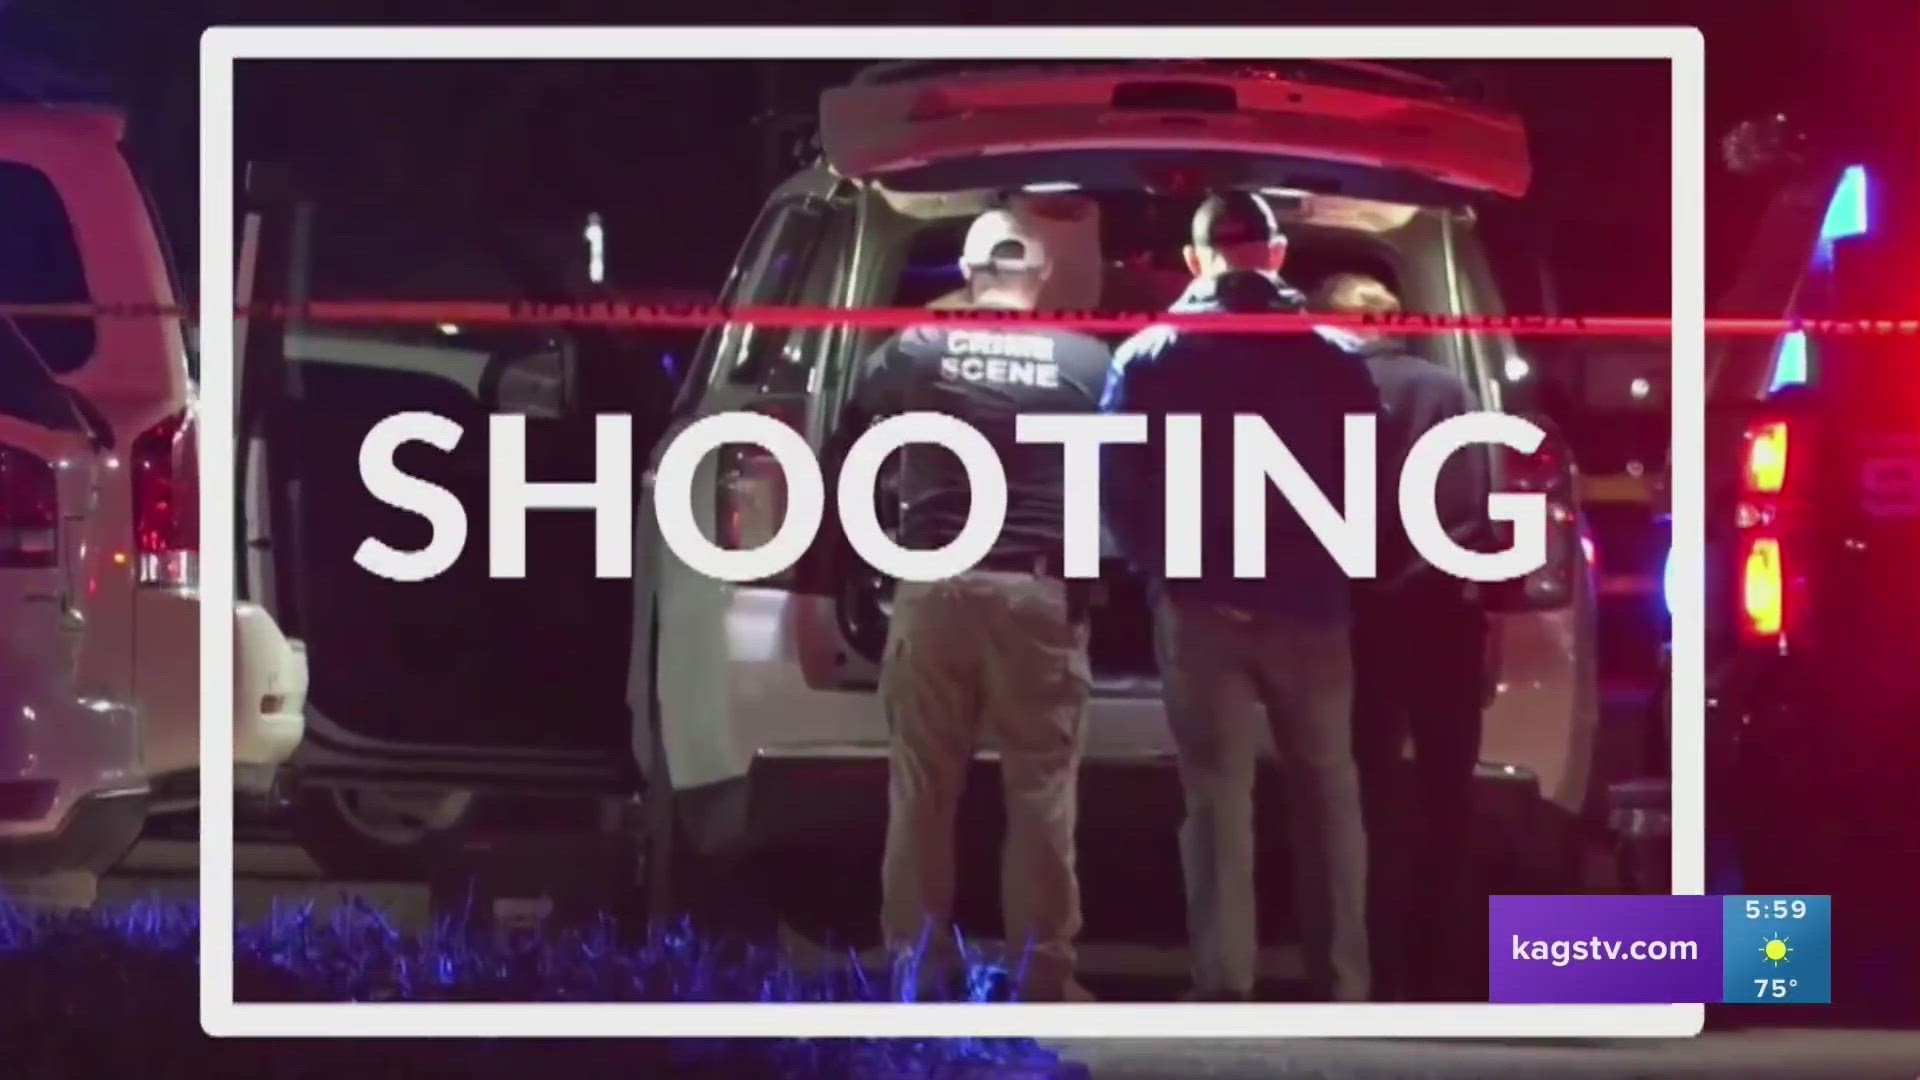 The Bryan Police Department said they are investigating a shooting incident that left multiple people shot.